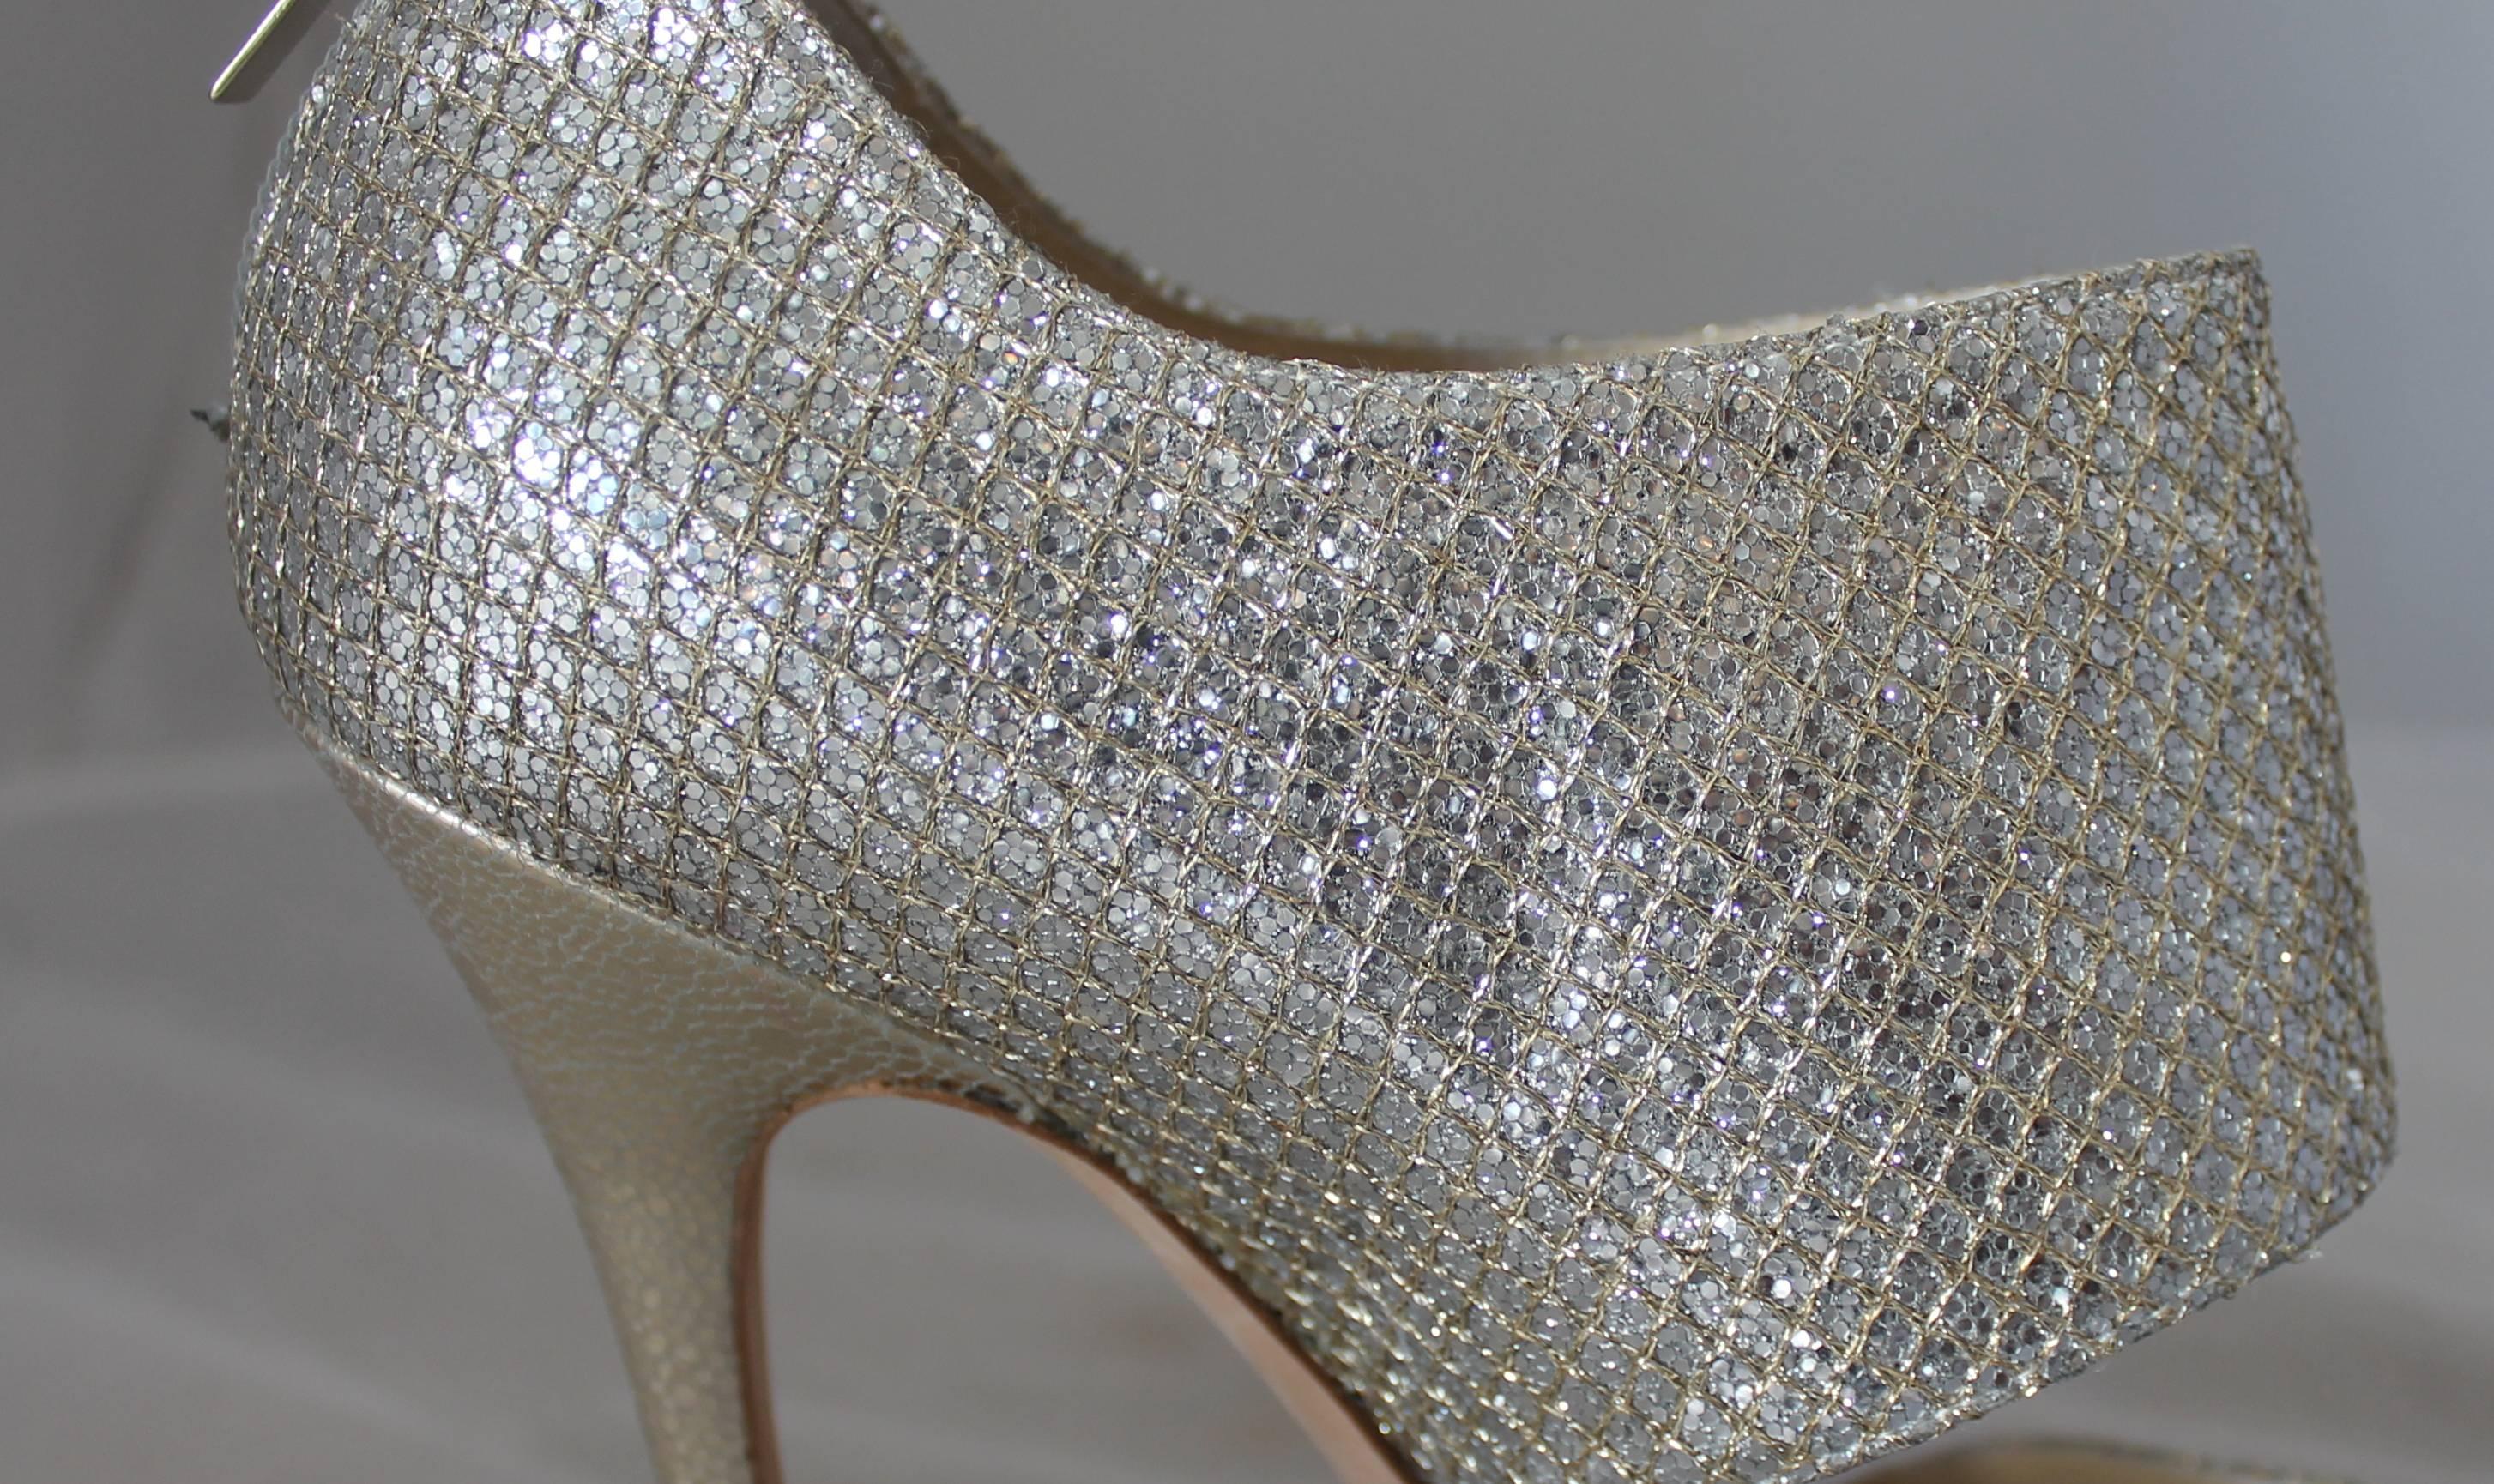 Jimmy Choo Silver and Gold Double Strap High Heel Bootie-Style Sandal - 39.5.  These stunning shoes have a silver and gold sparkle lame and leather material.  They have a back zip and a front platform.  They are barely worn and are in excellent